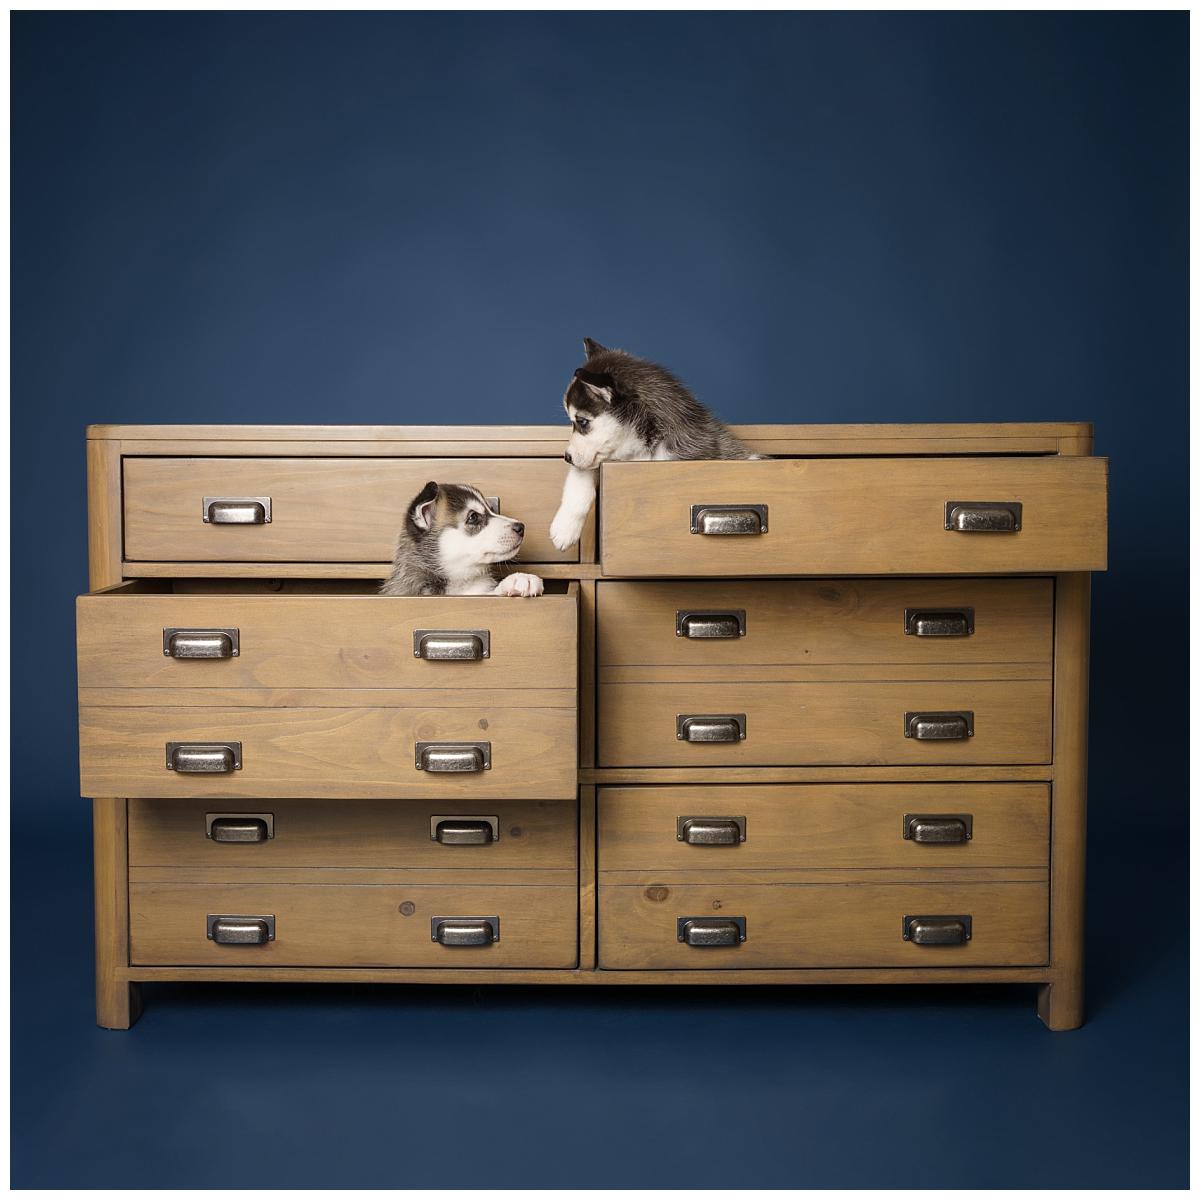 Professional pet photograph, taken by Northern Ireland's top pet photographer in Belfast of 2 Husky puppies in a chest of draws